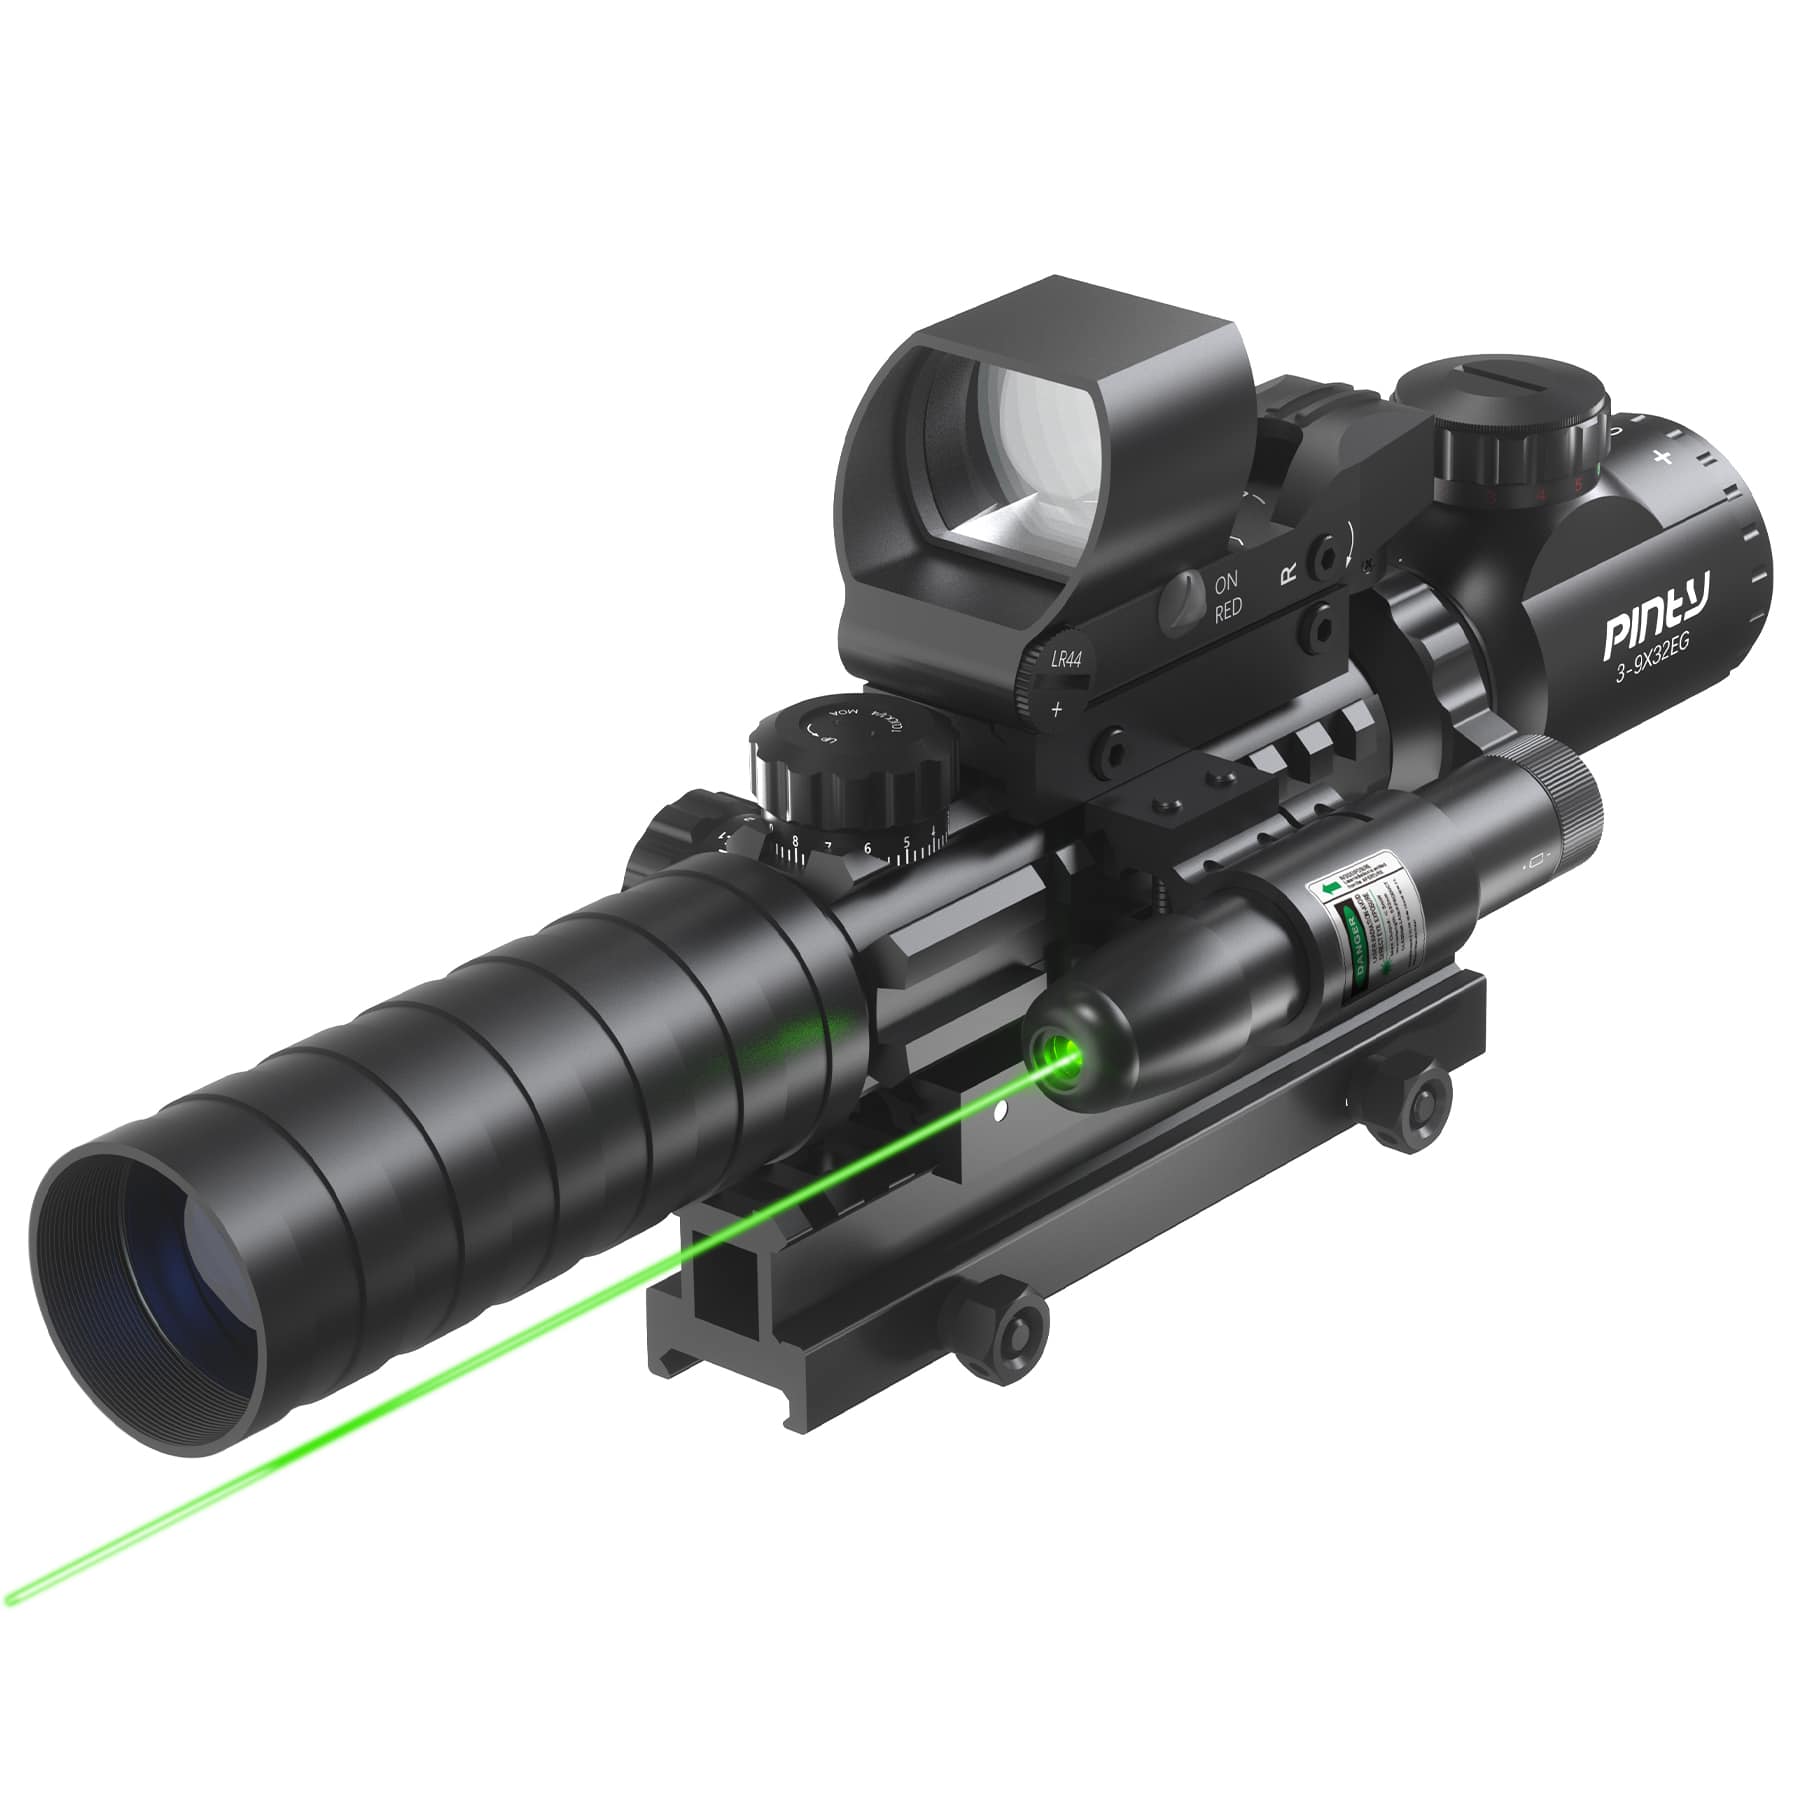 red-dot-scope-combo-scope-red-dot-combo-ar-15-scope-red-dot-combo-red-dot-scopes-airsoft-red-dot-sight-rifle-airsoft